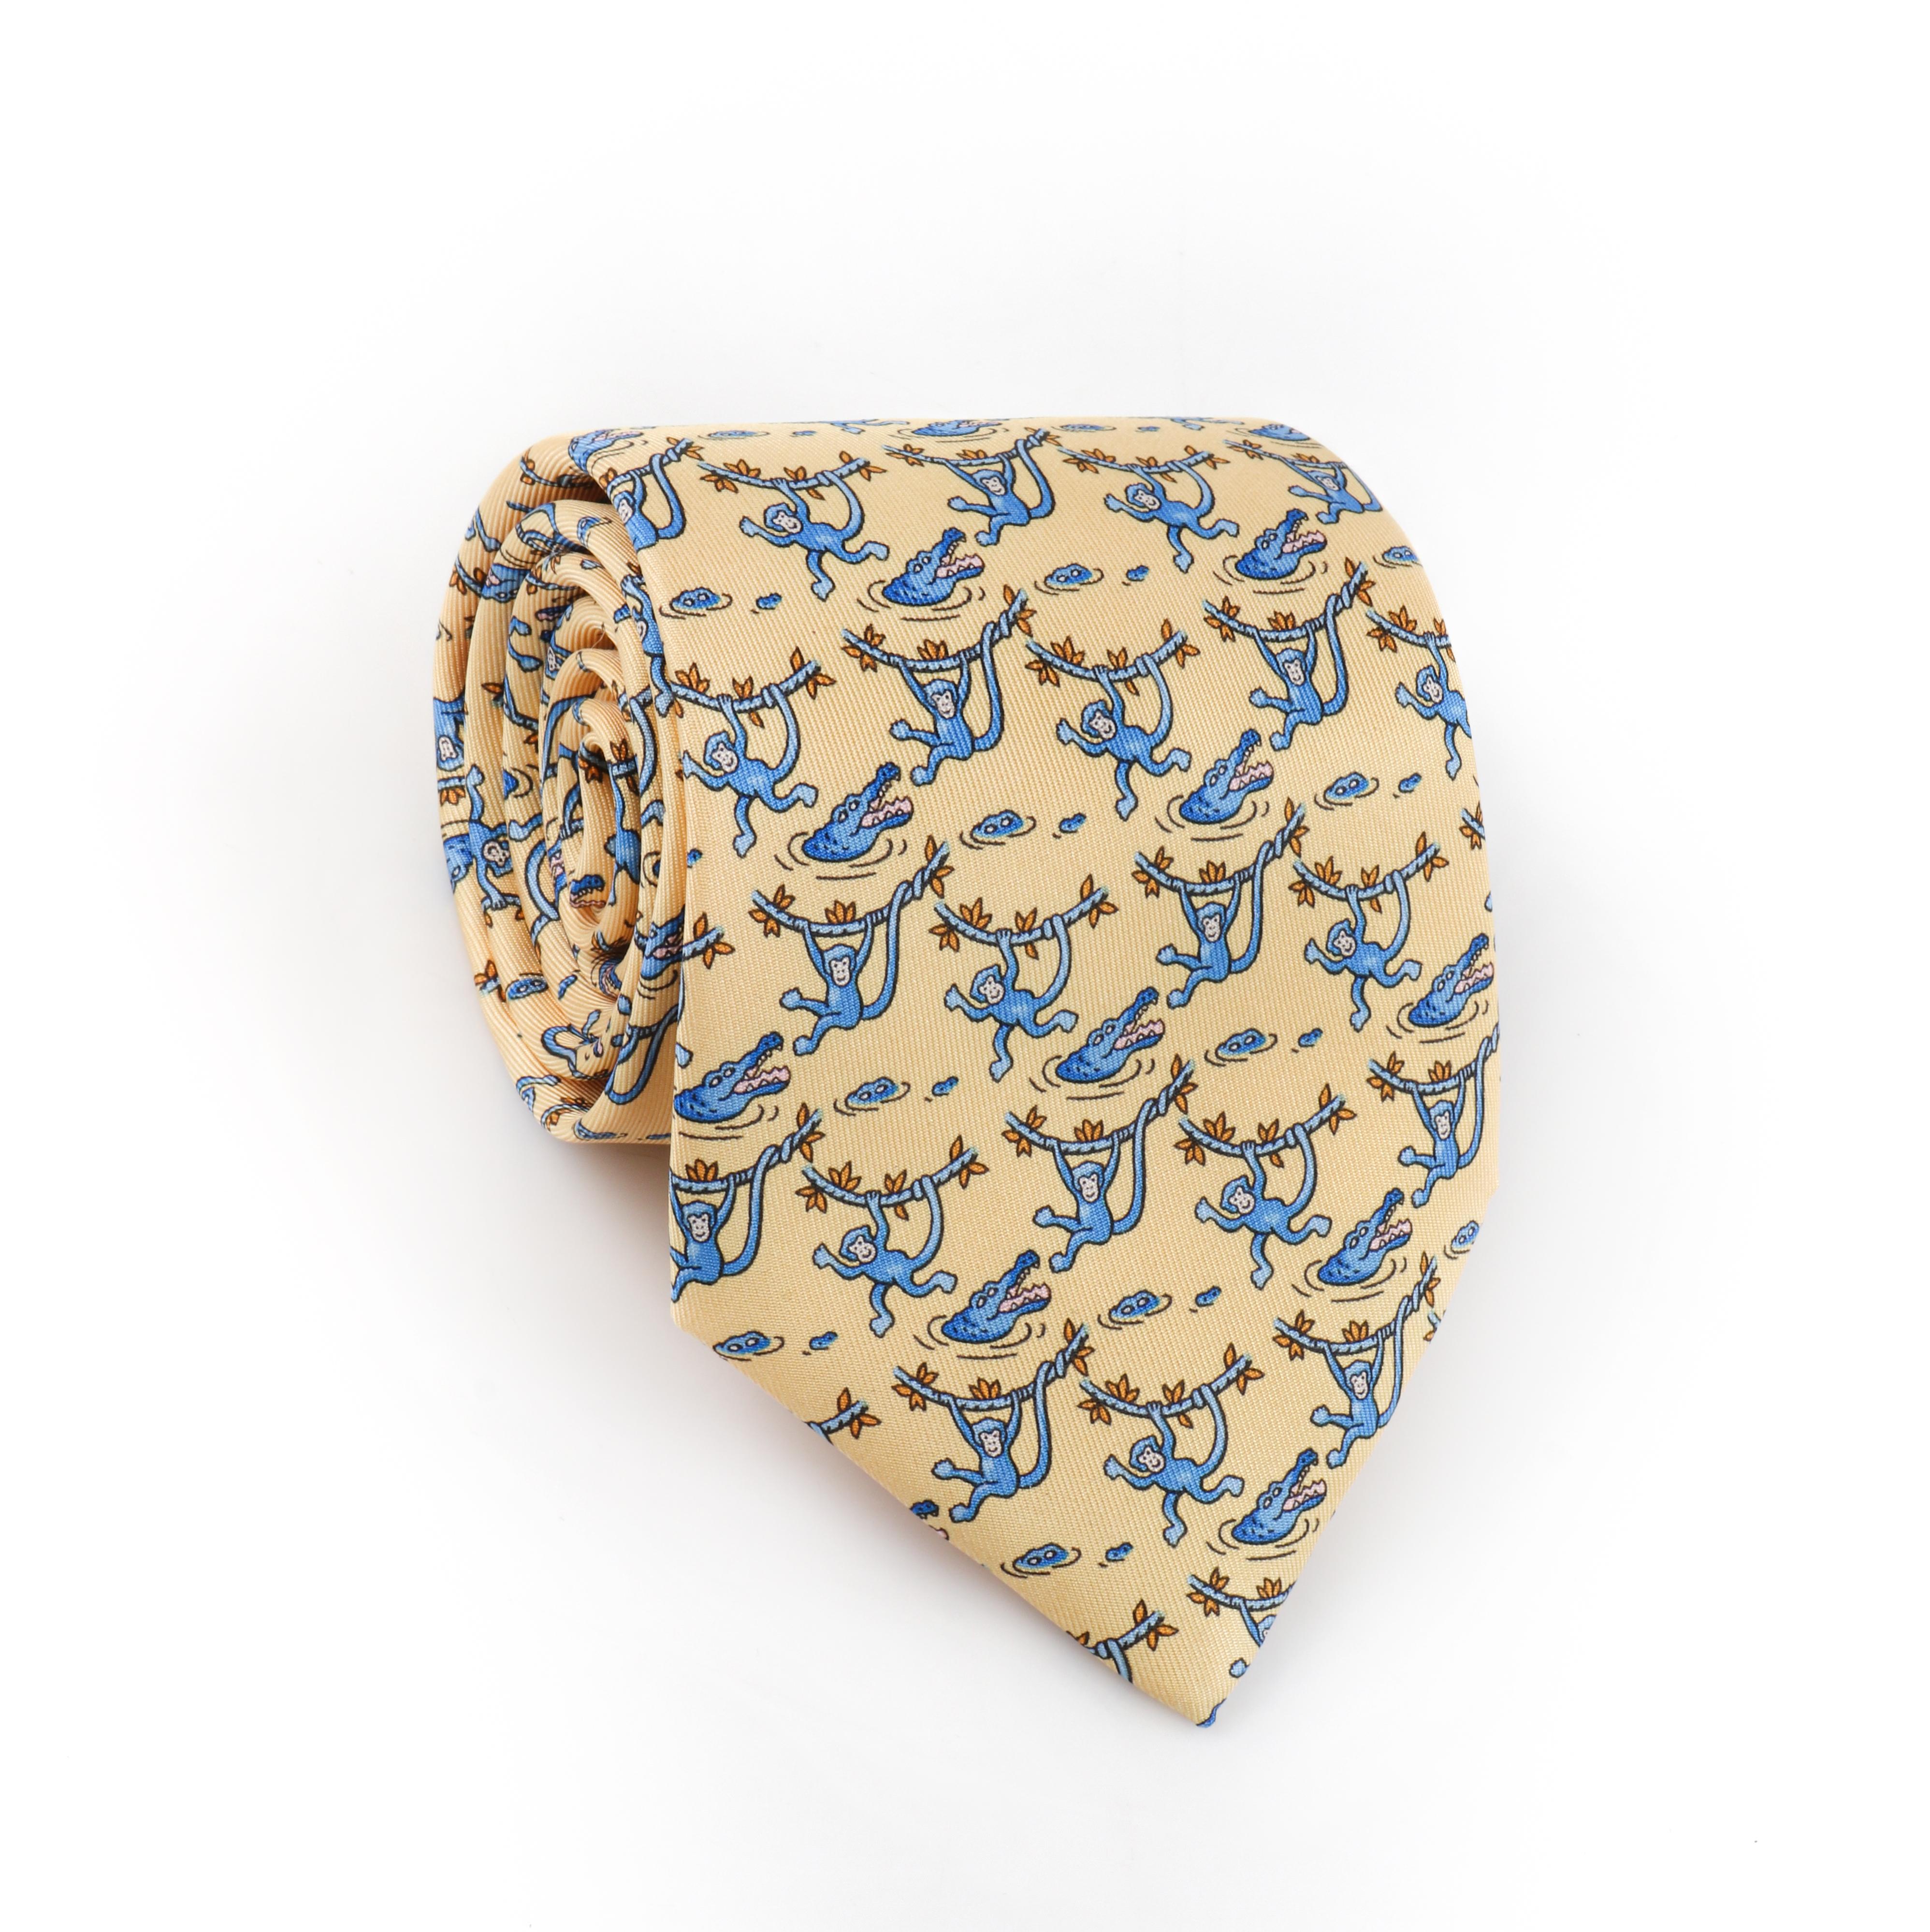 HERMES Men’s Yellow Blue Monkey Crocodile 5-Fold Silk Necktie Tie 7682 TA w/Tags
 
Brand/Manufacturer: Hermes
Style: 5-Fold necktie
Color(s): Shades of yellow, blue, orange, black, white
Lined: Yes
Marked Fabric Content: “100% Silk”  
Additional